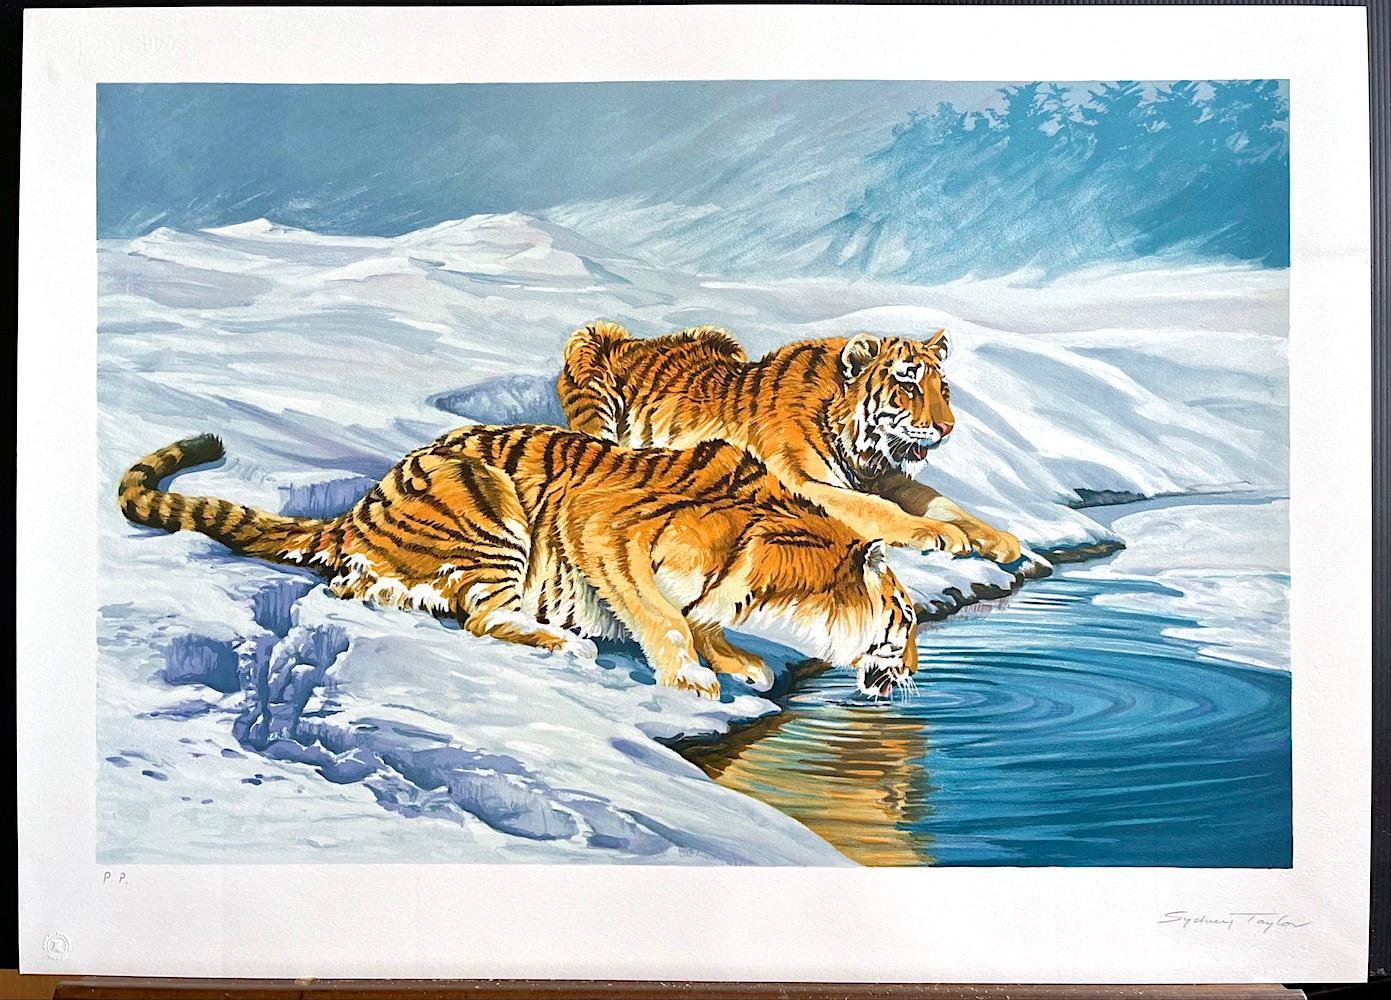 SIBERIAN TIGERS Signed Lithograph Tigers Drinking Snow Landscape Exotic Wildlife - Contemporary Print by Sydney Taylor